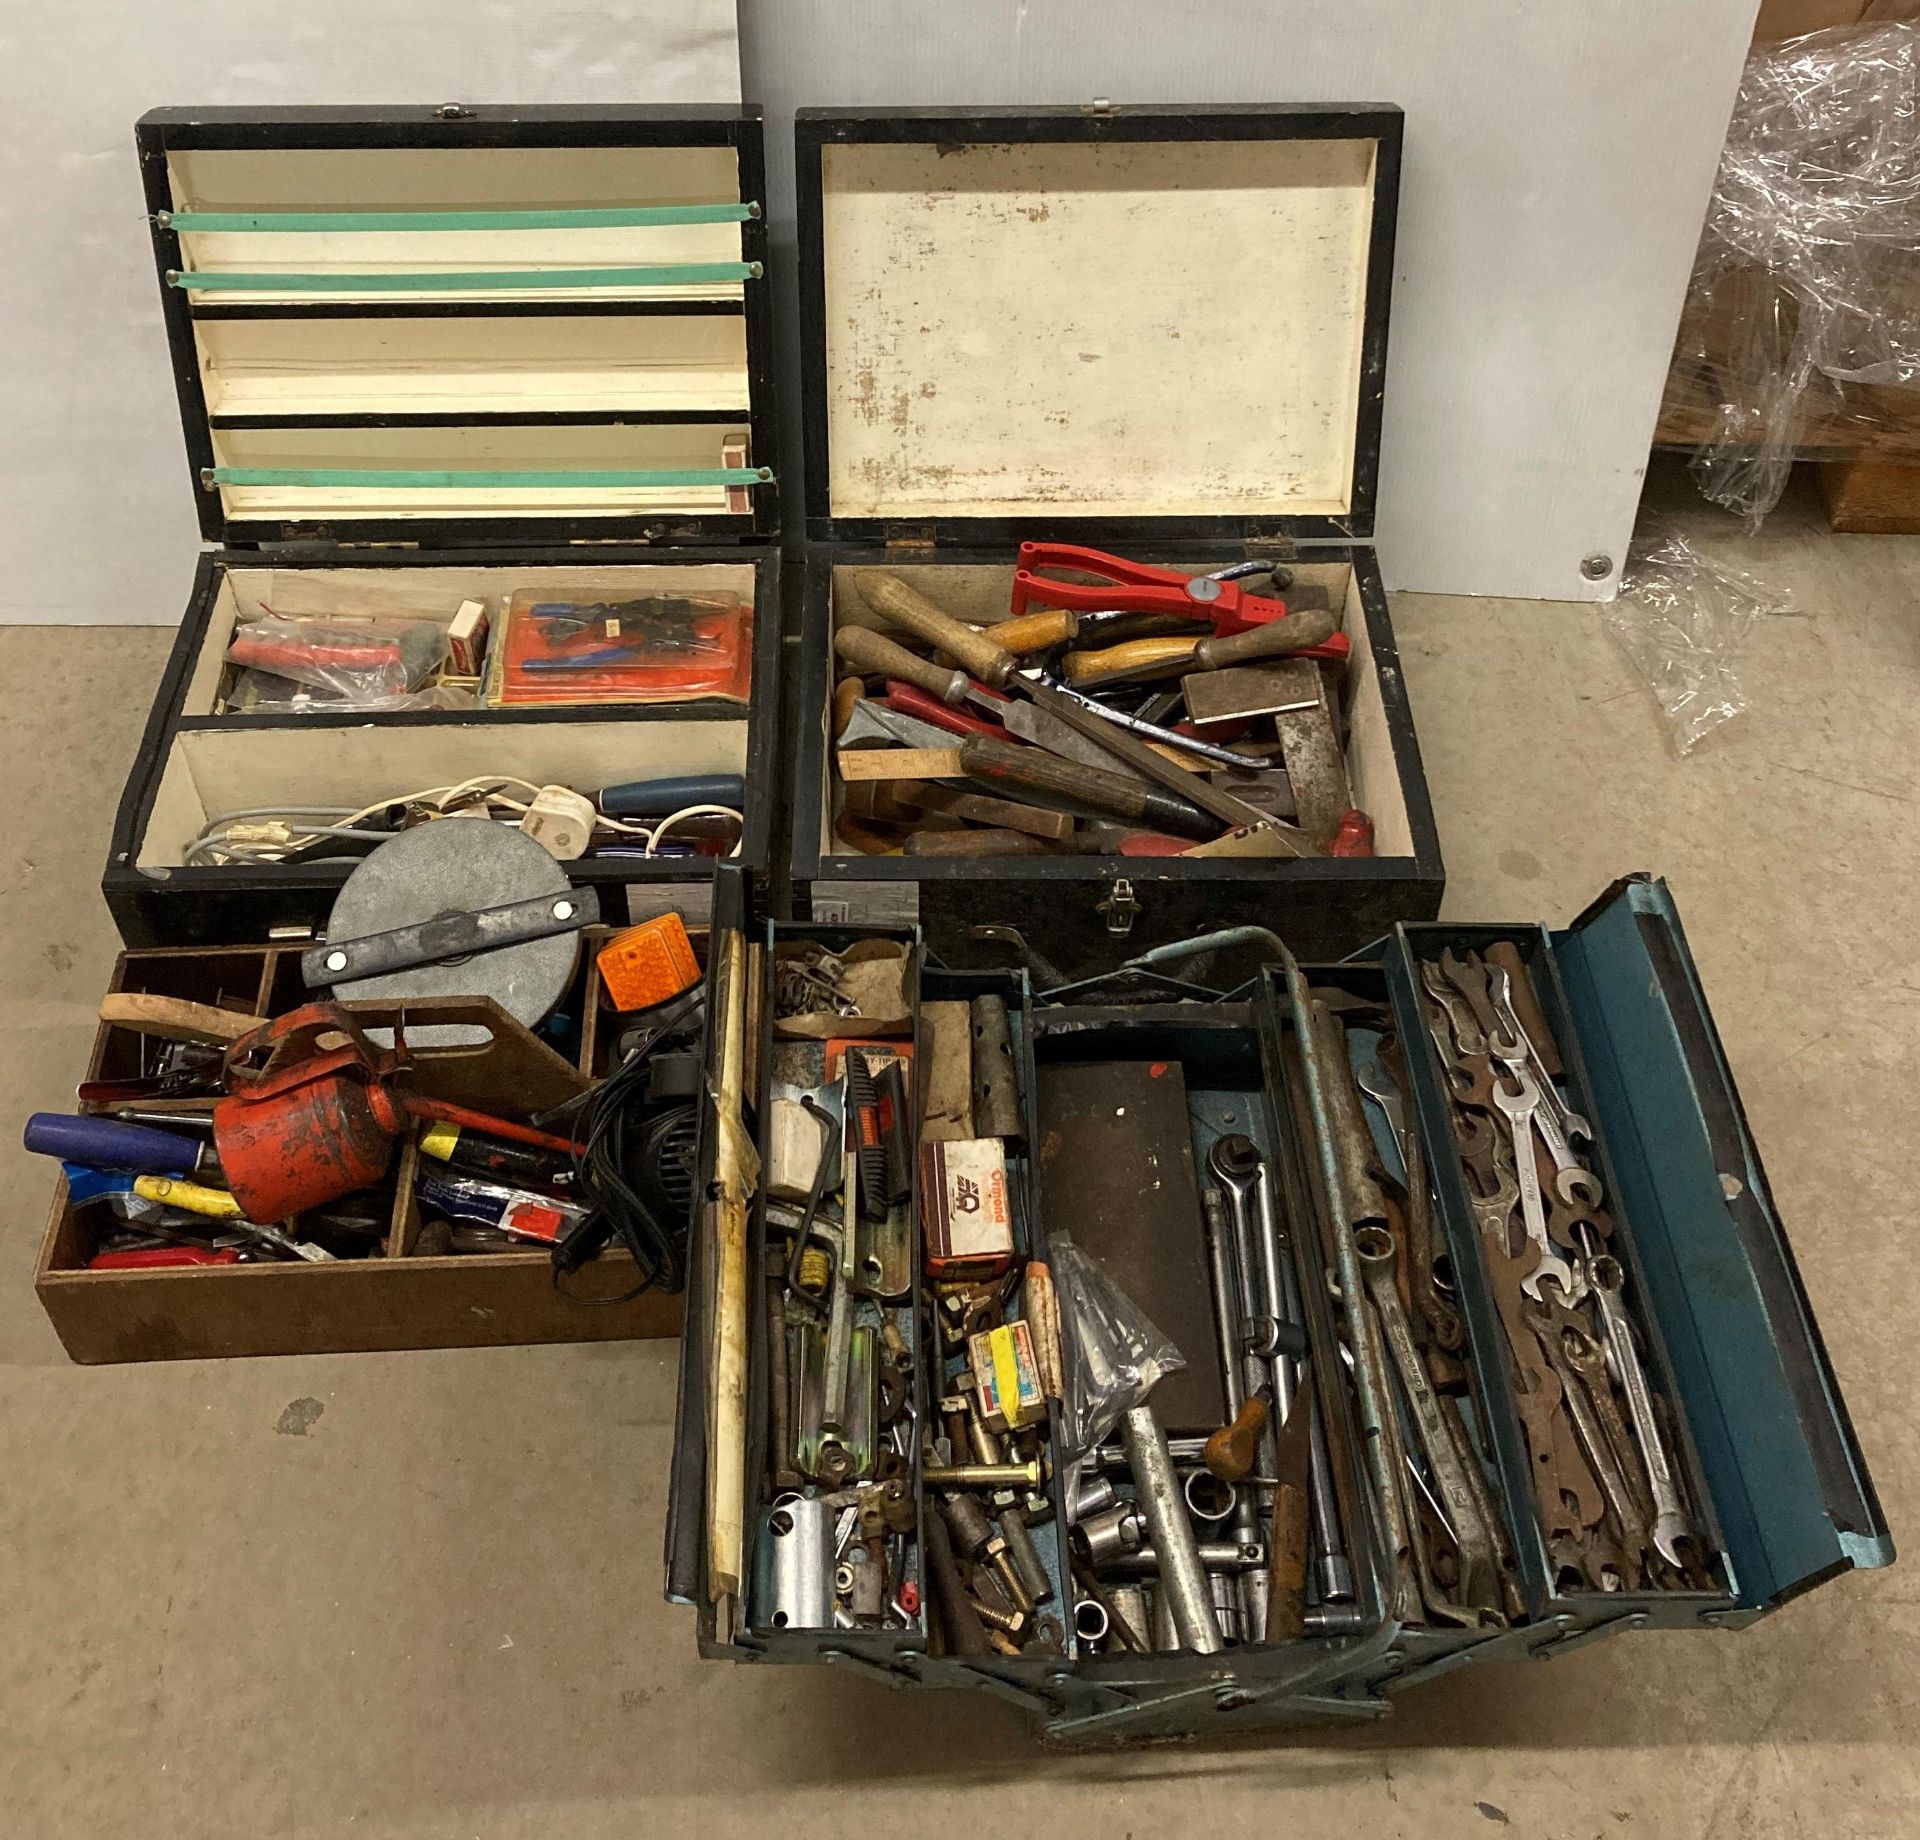 3 x assorted tool boxes and hand tools including spanners, screwdrivers, chisels, hammers,